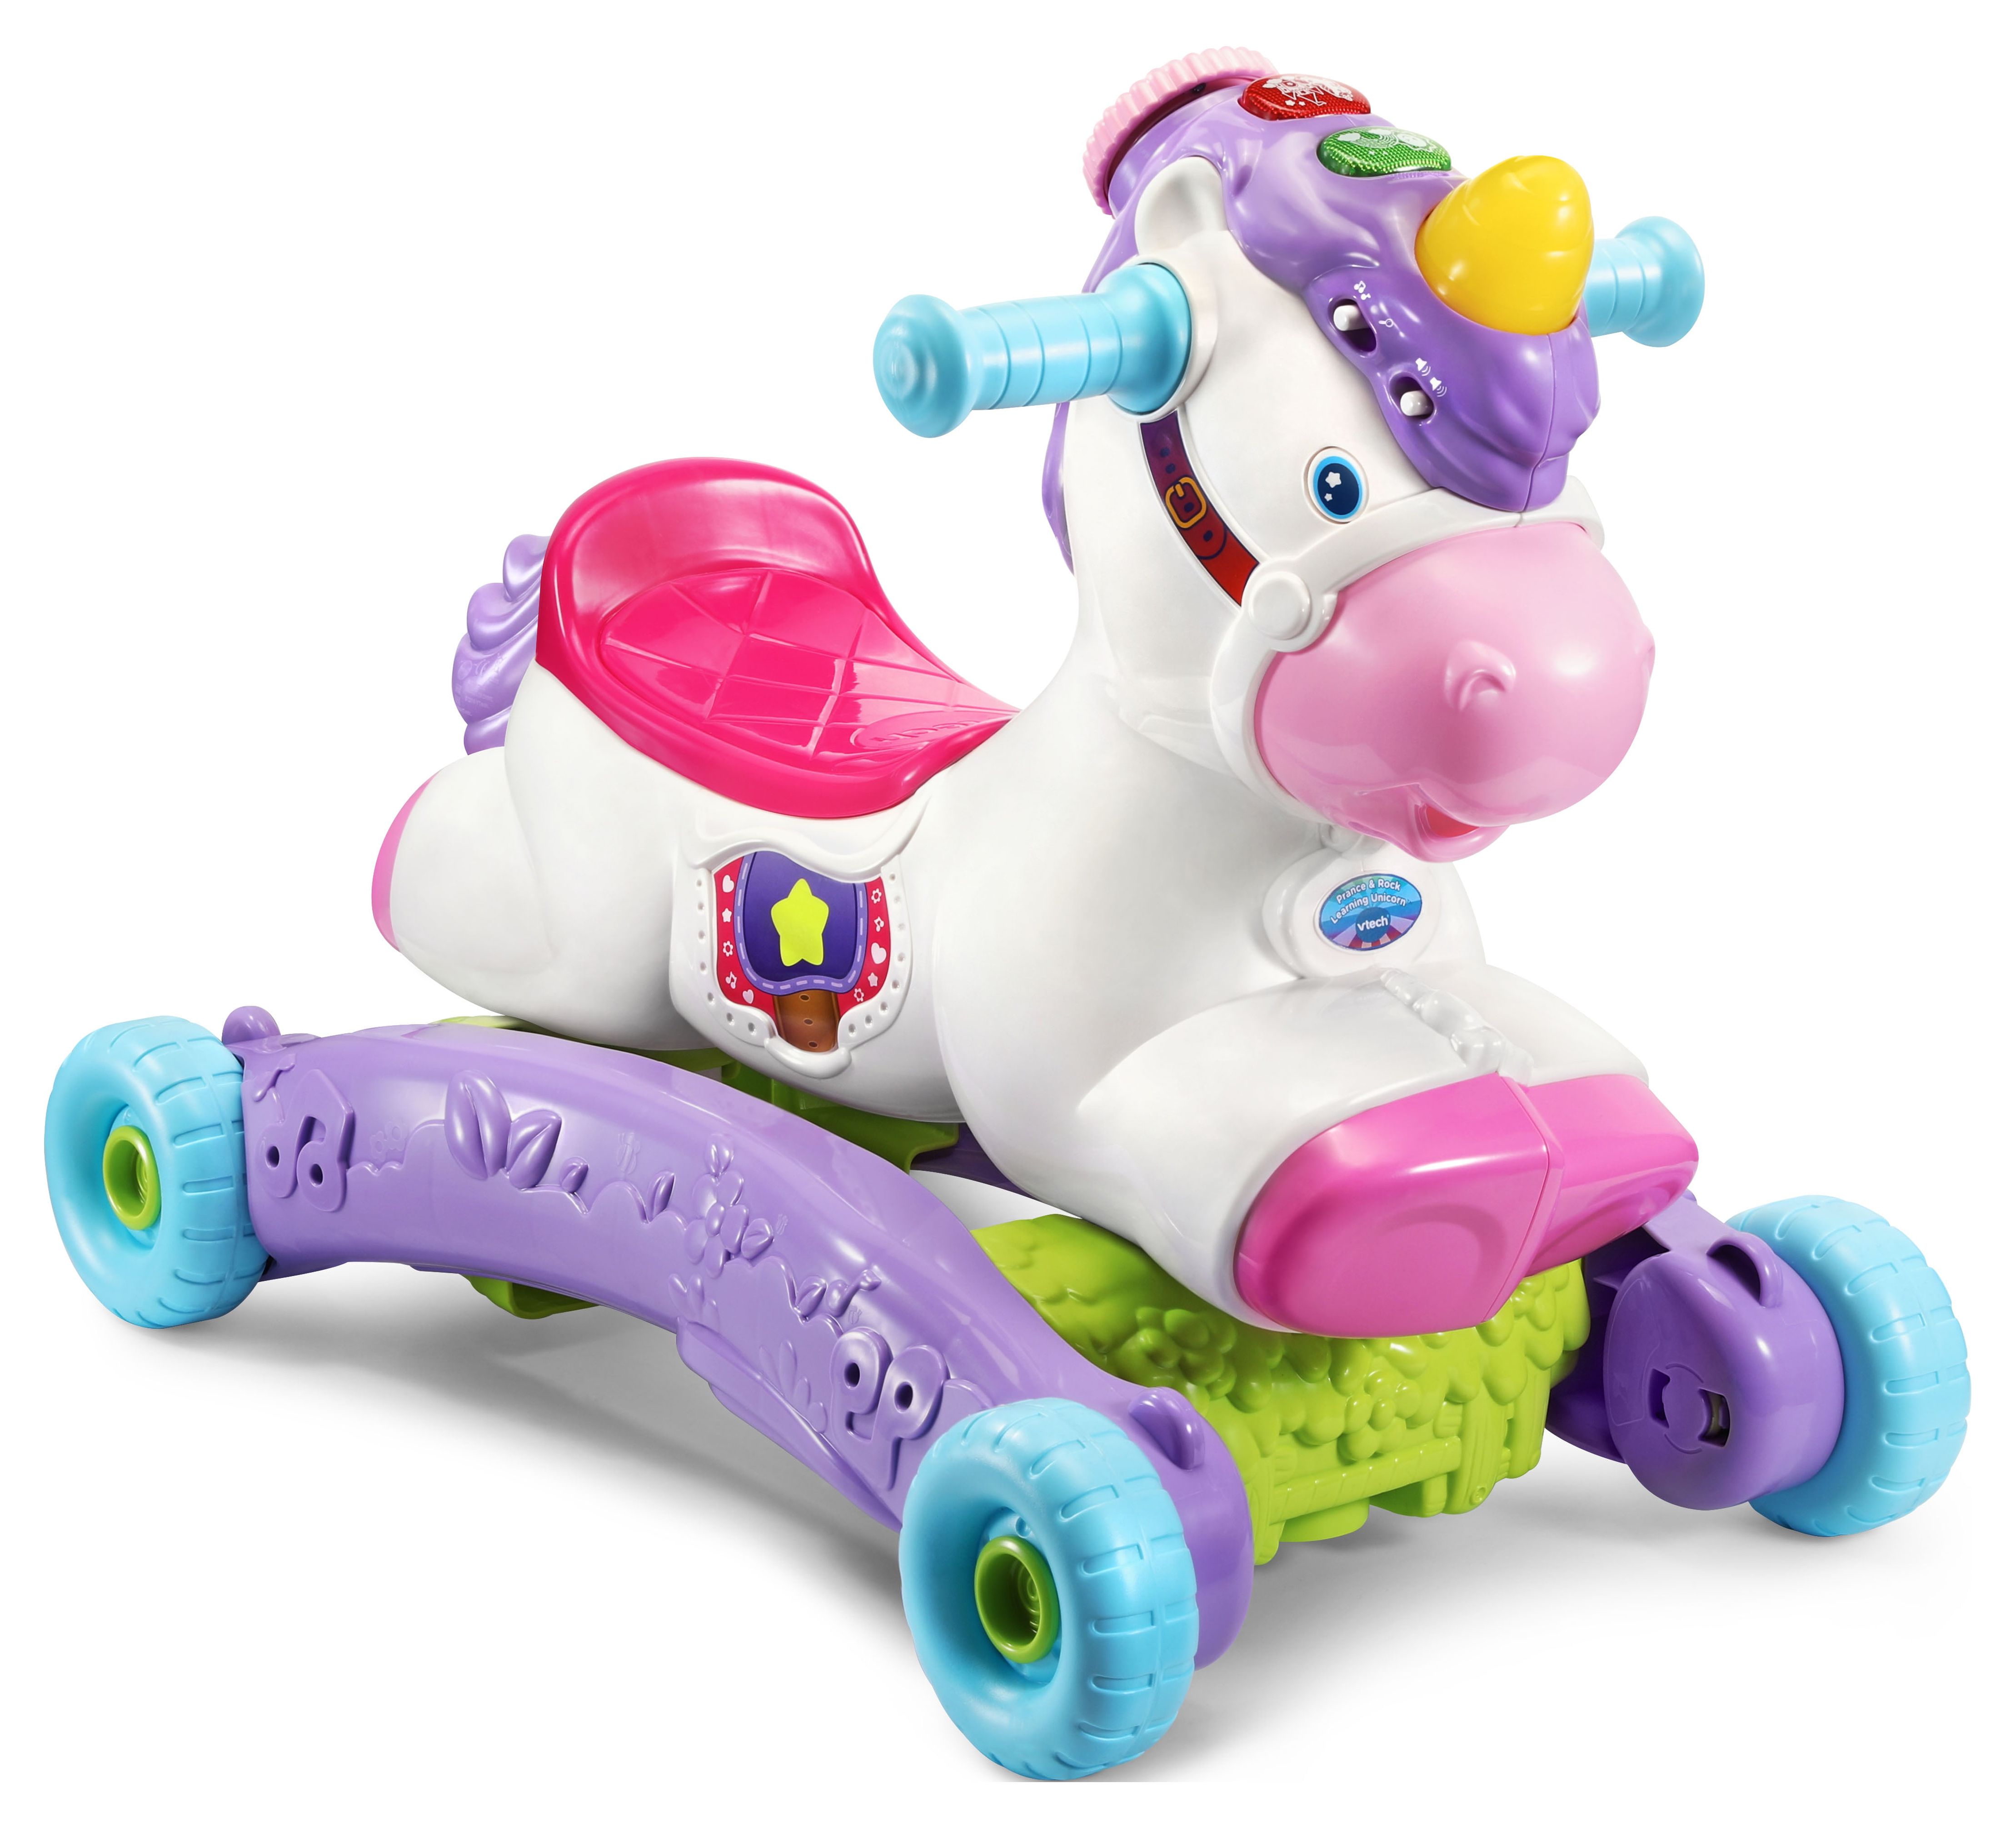 VTech Prance and Rock Learning Unicorn, Rocker to Rider Toy, Motion-Activated Responses - image 10 of 14